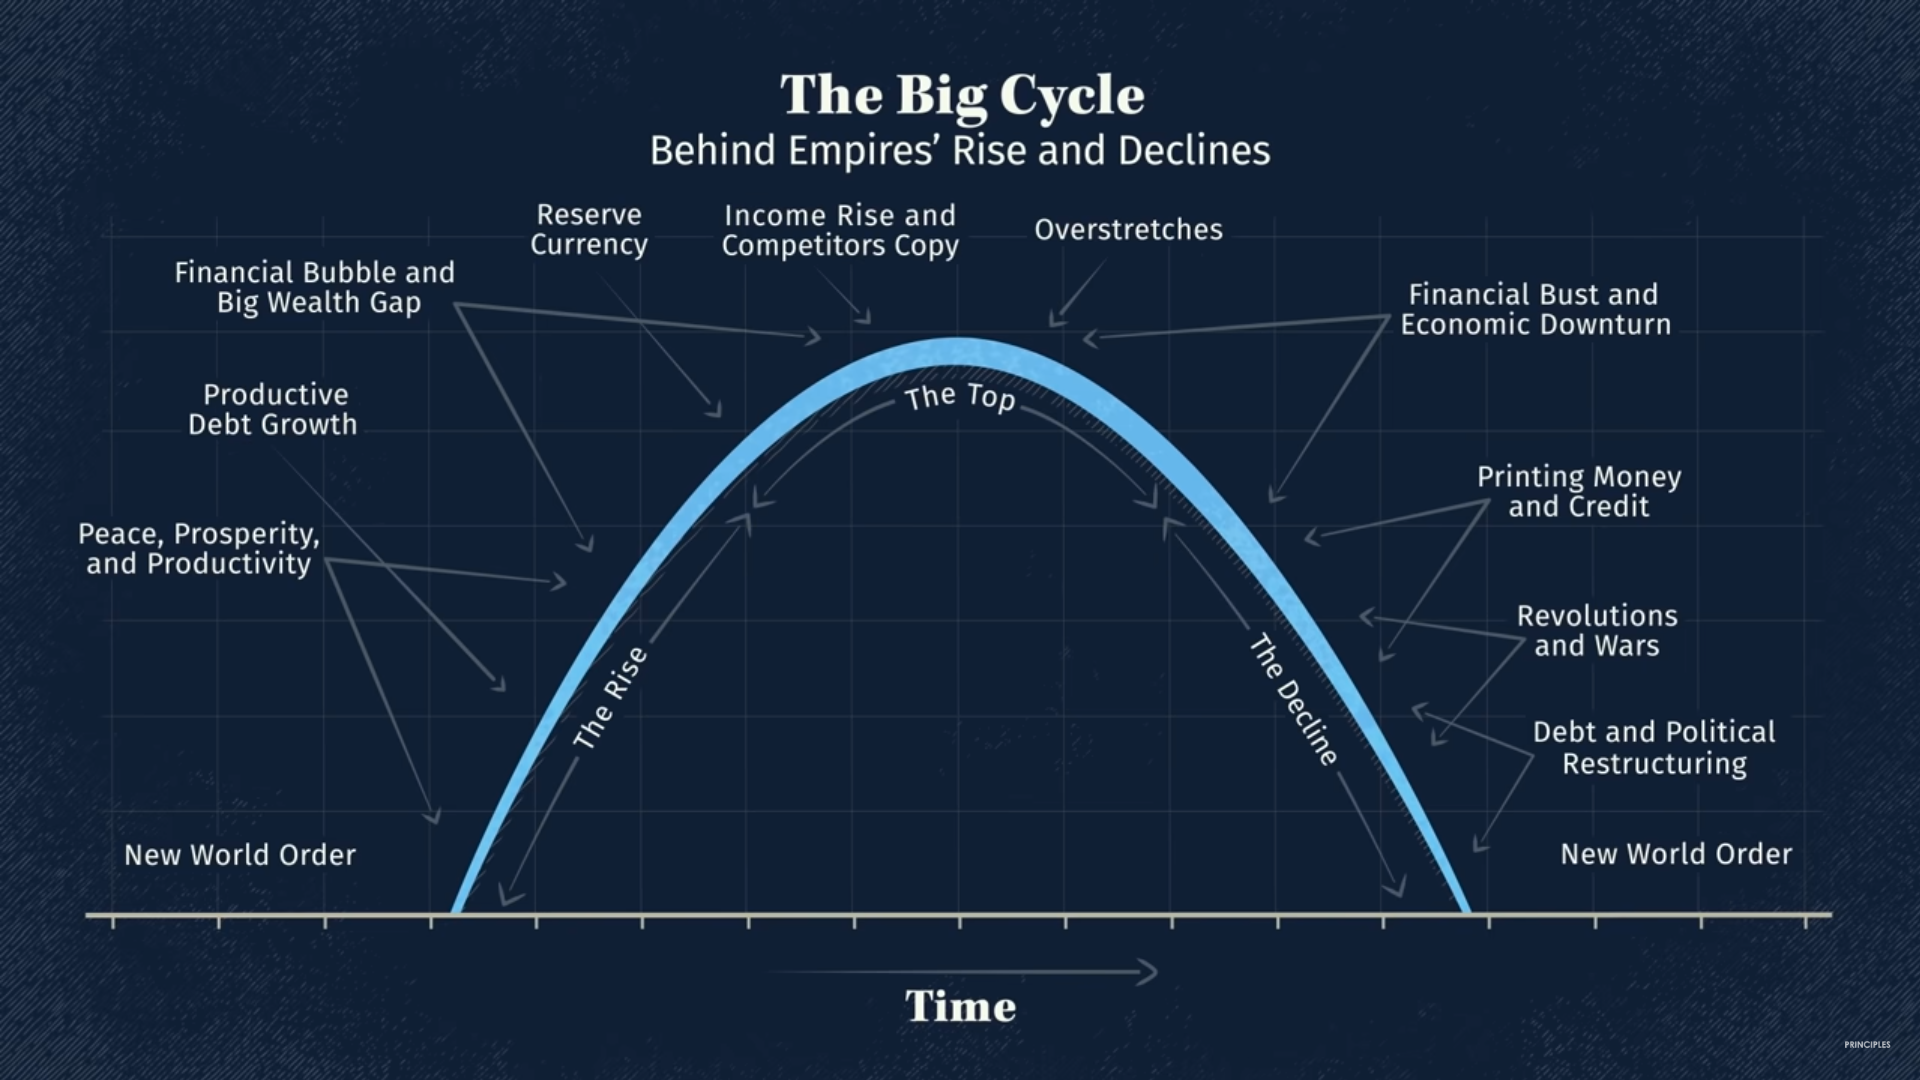 The big cycle of economic order of empires